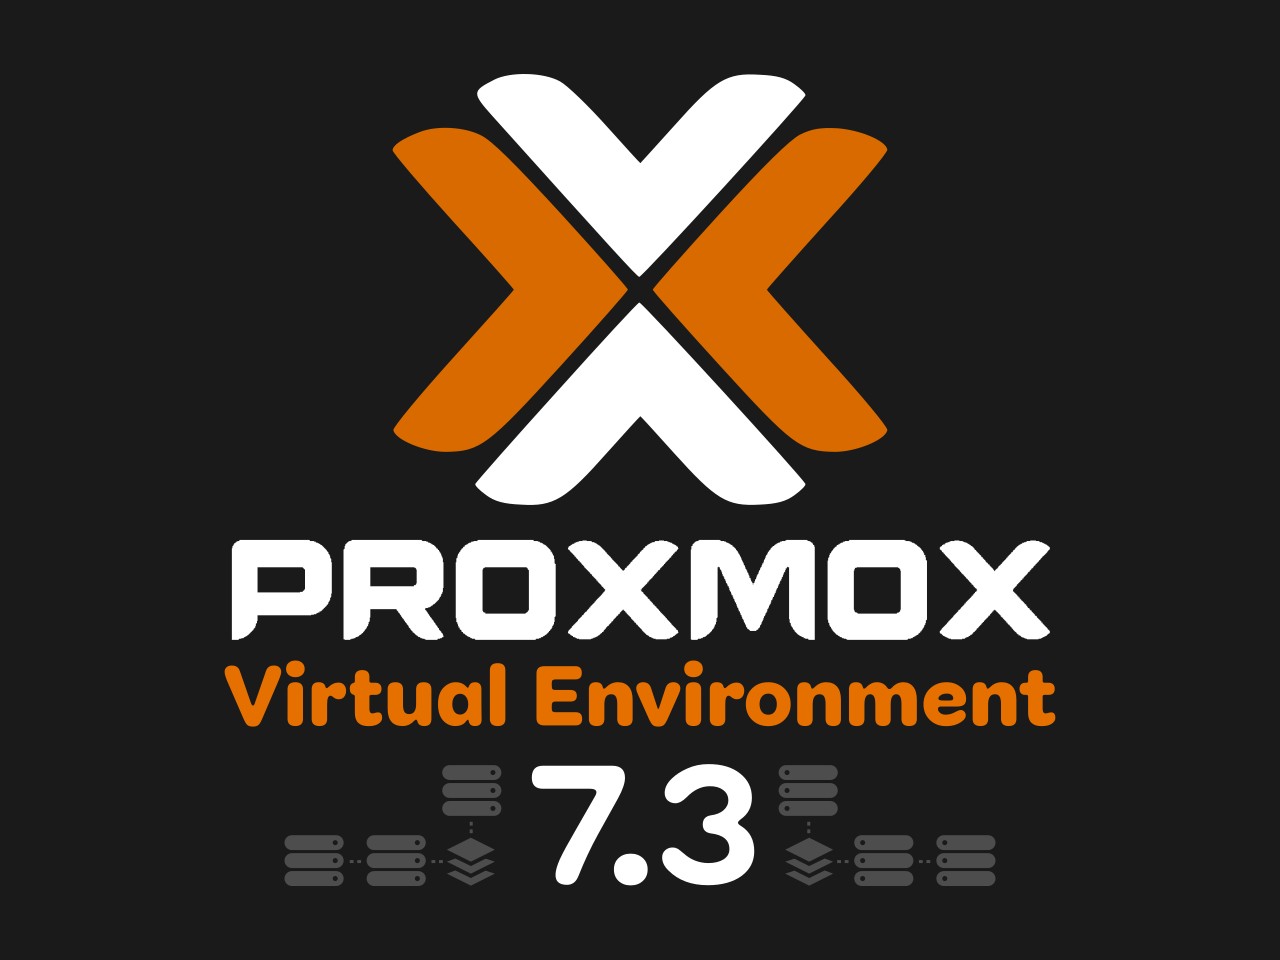 Proxmox 7.3 Brings Initial Support for Cluster Resource Scheduling